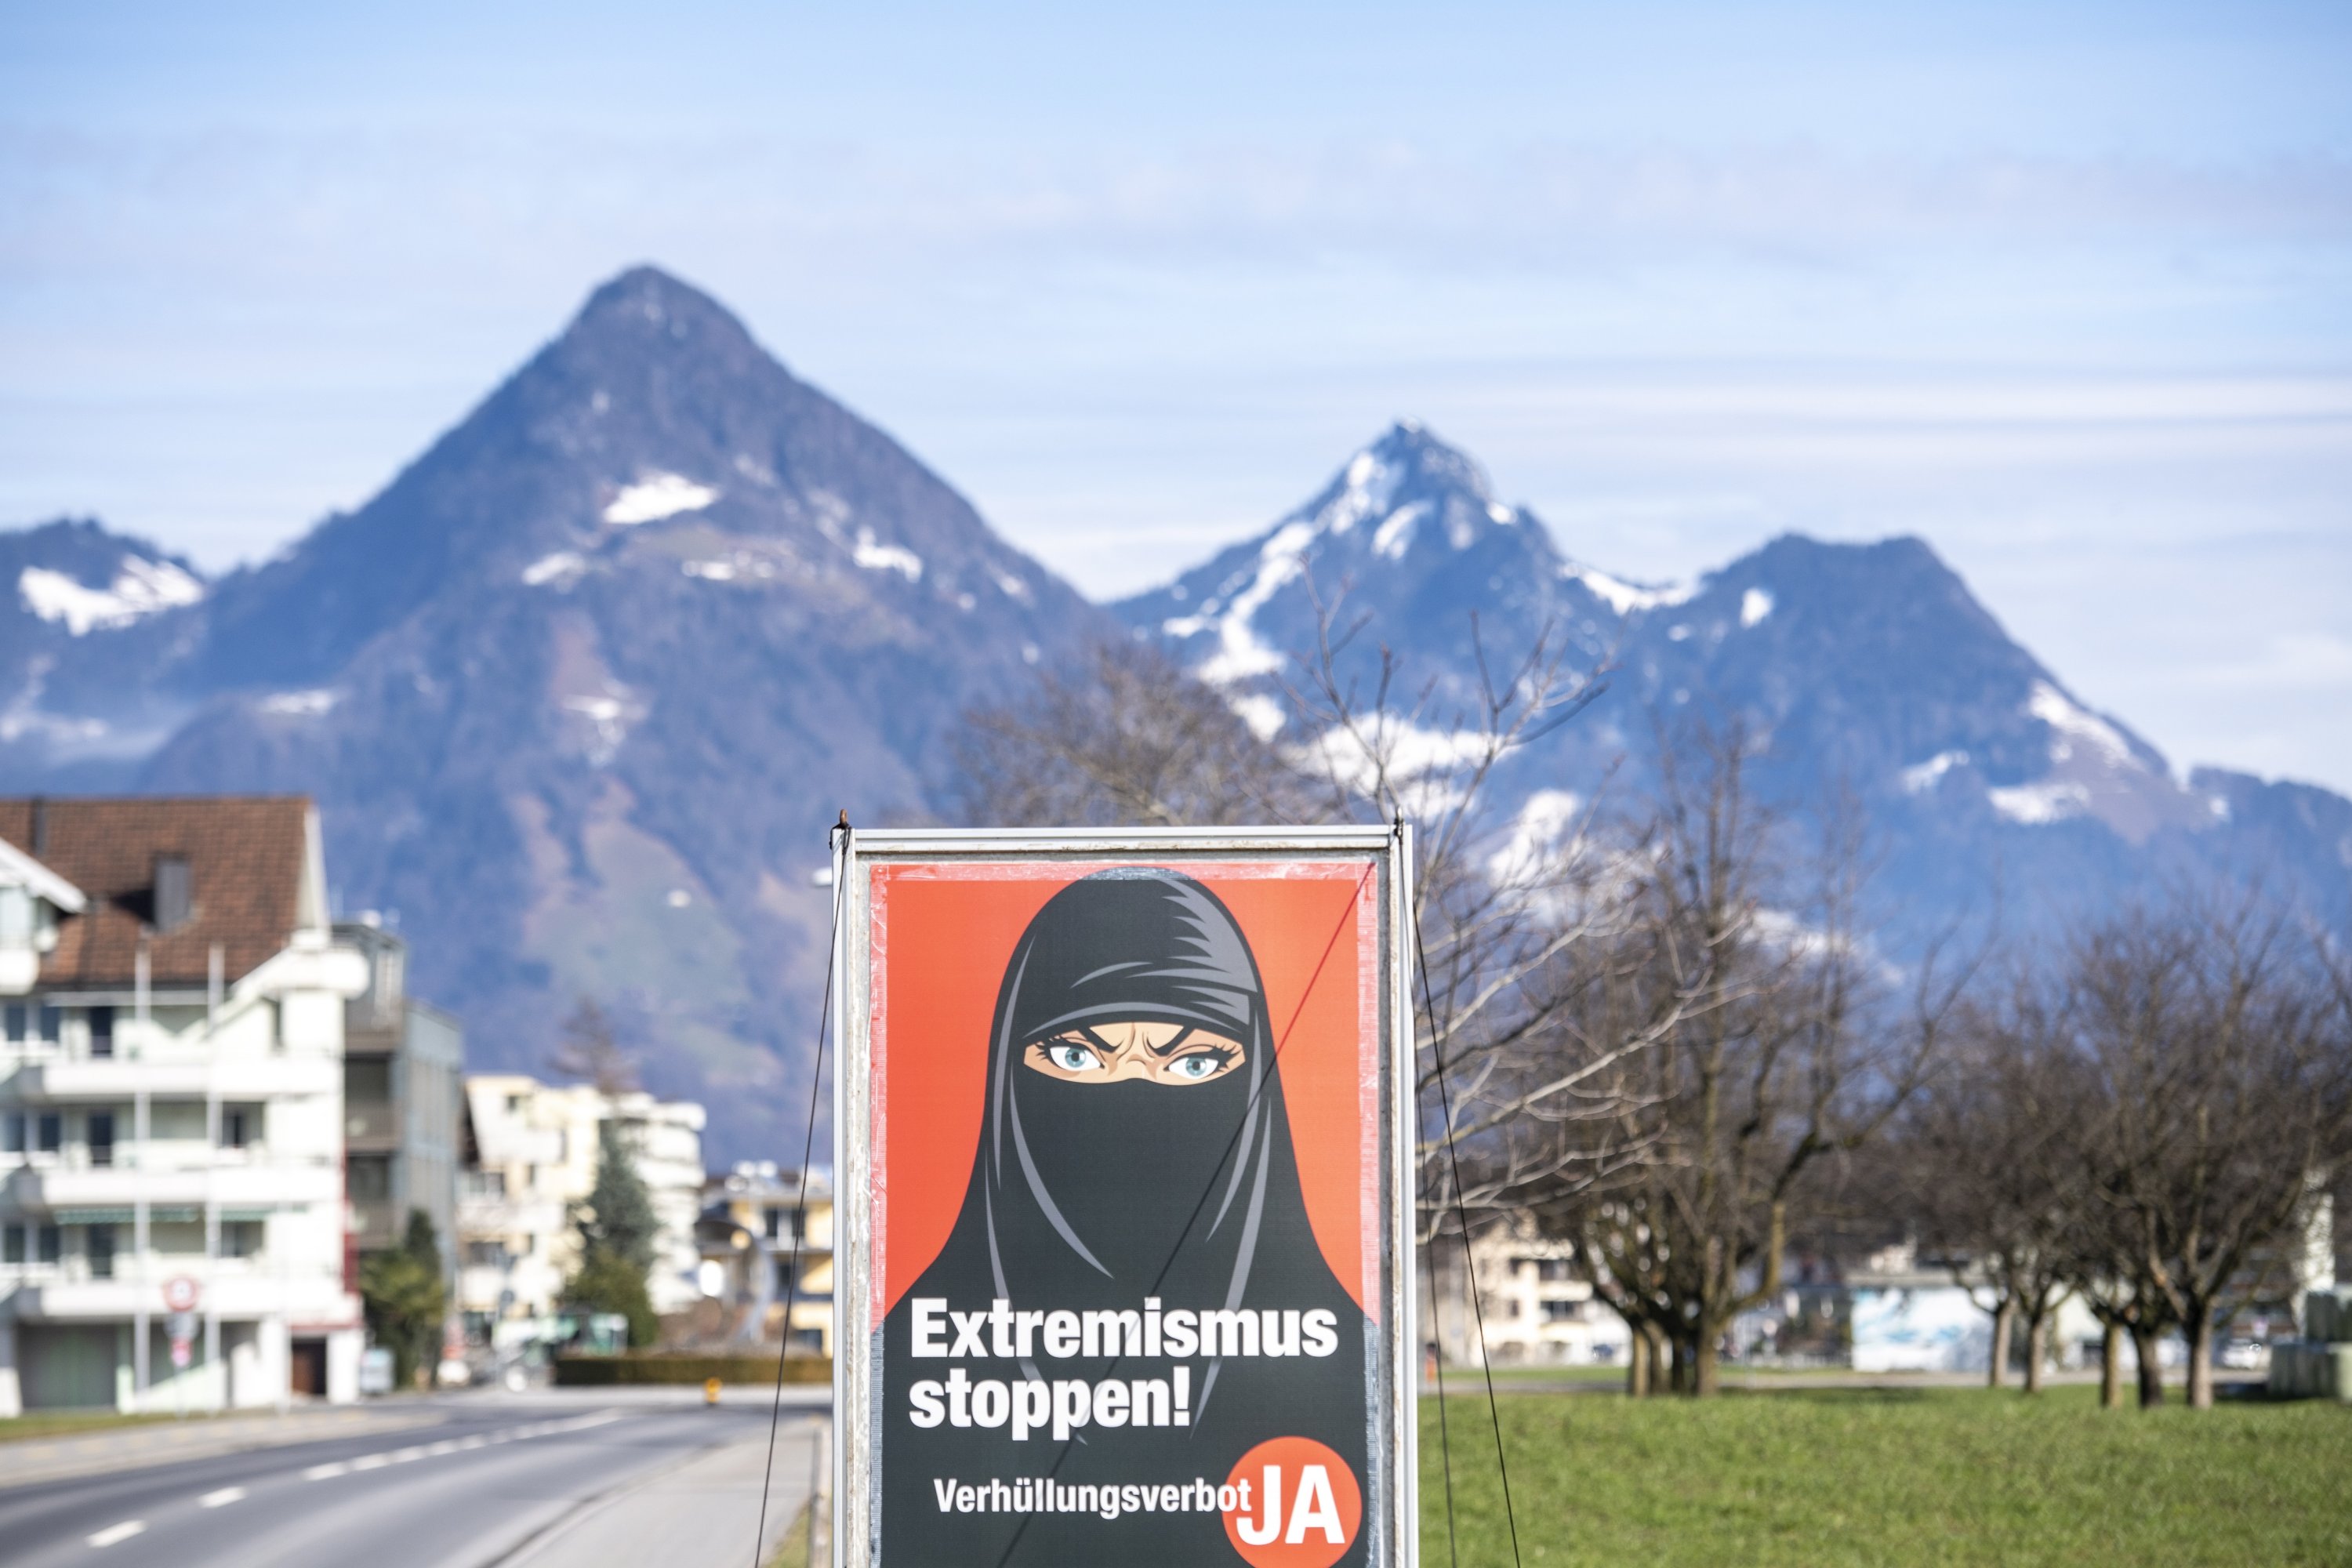 UN religious freedom expert blasts Swiss move to ban burqa | Daily Sabah